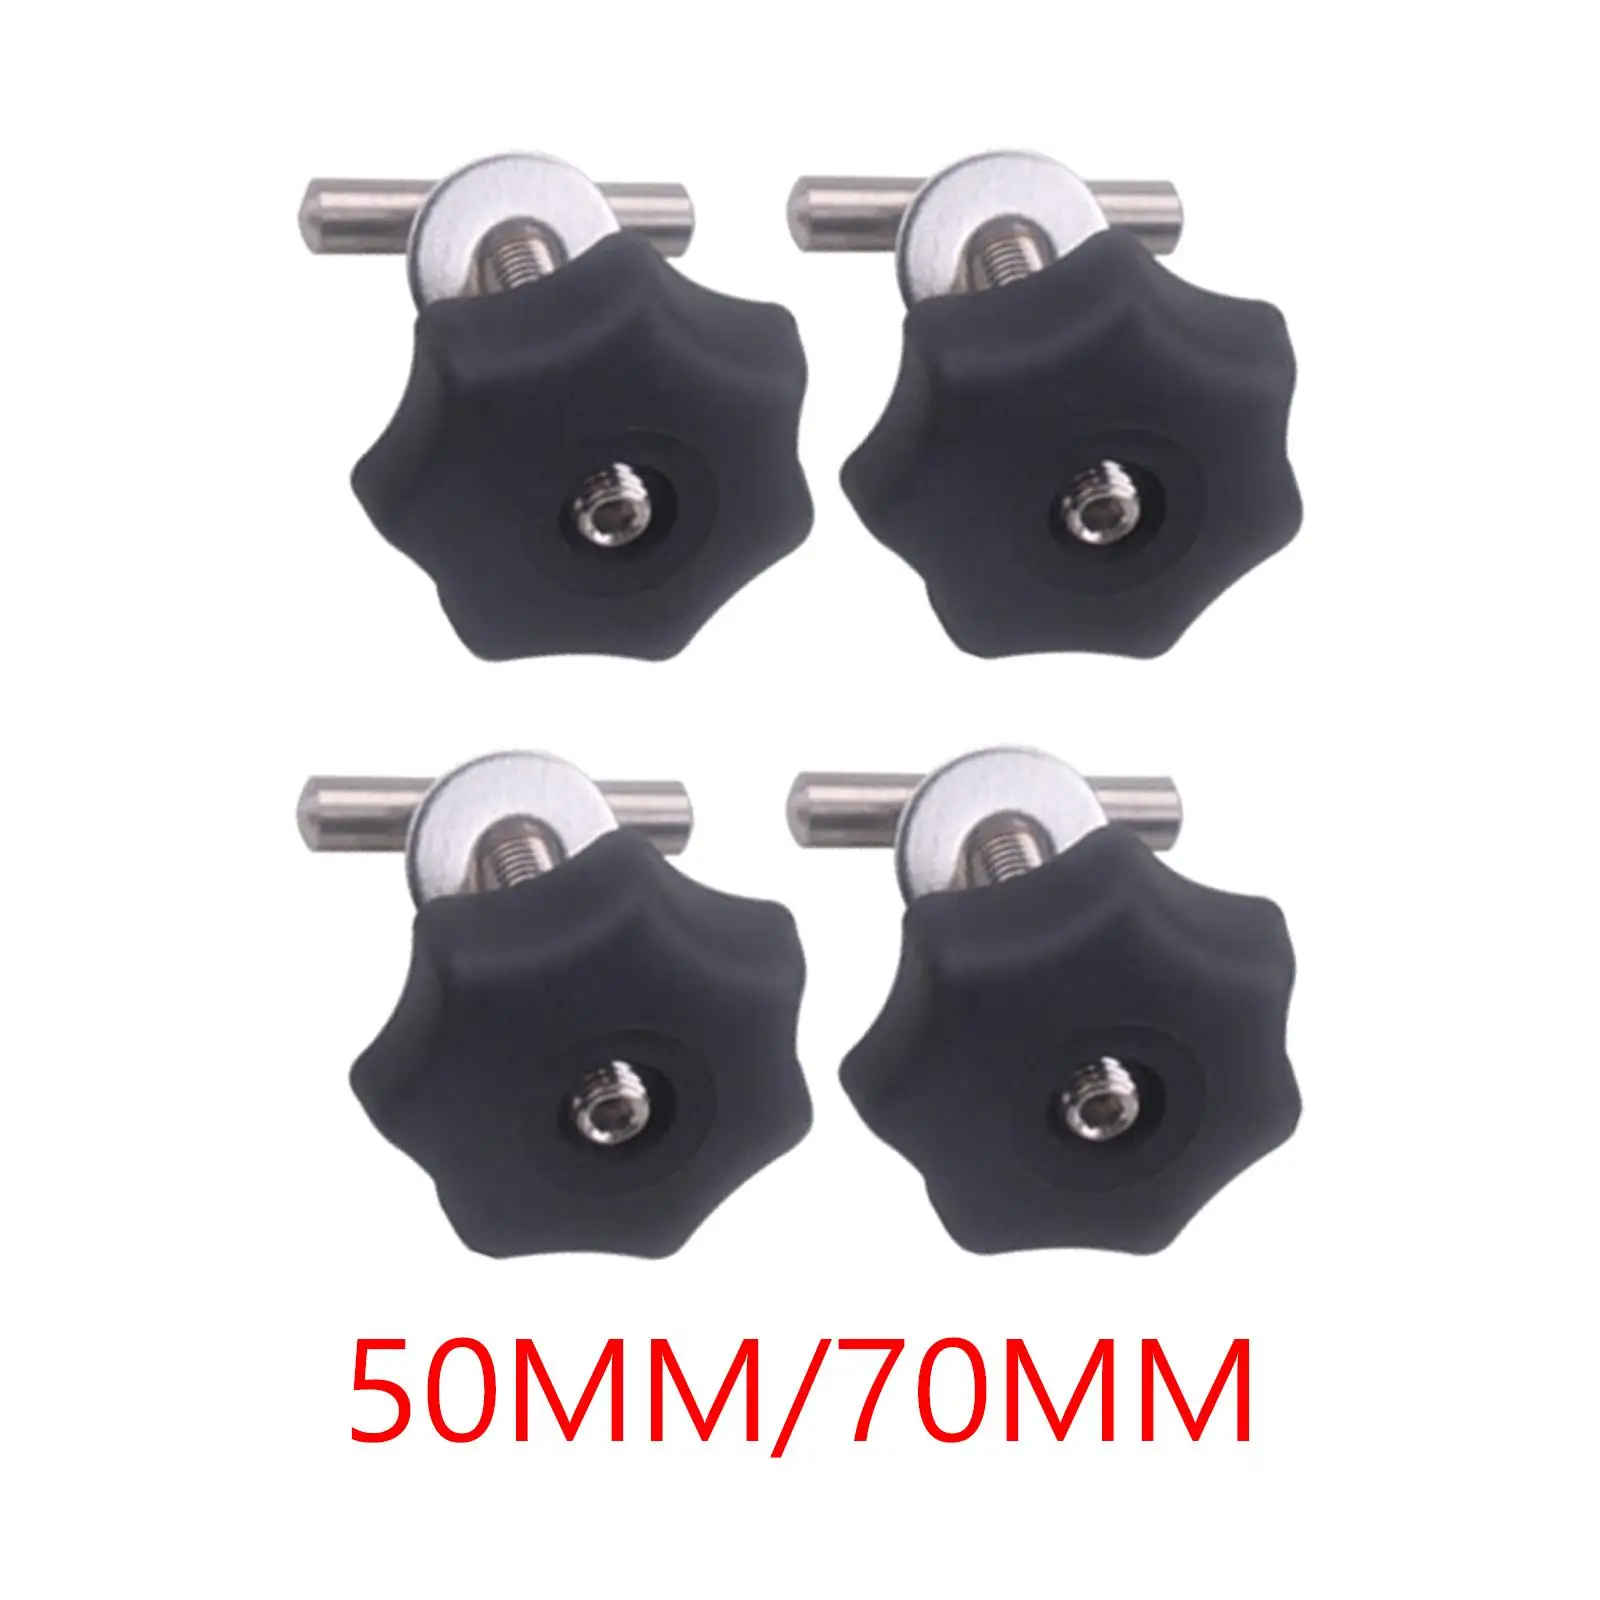 4 Pieces Fixing Screws set Mounting Accessories Accessories Vehicle Parts Bolt Set 50mm/70mm for VW T5 T6 Assembly Repair